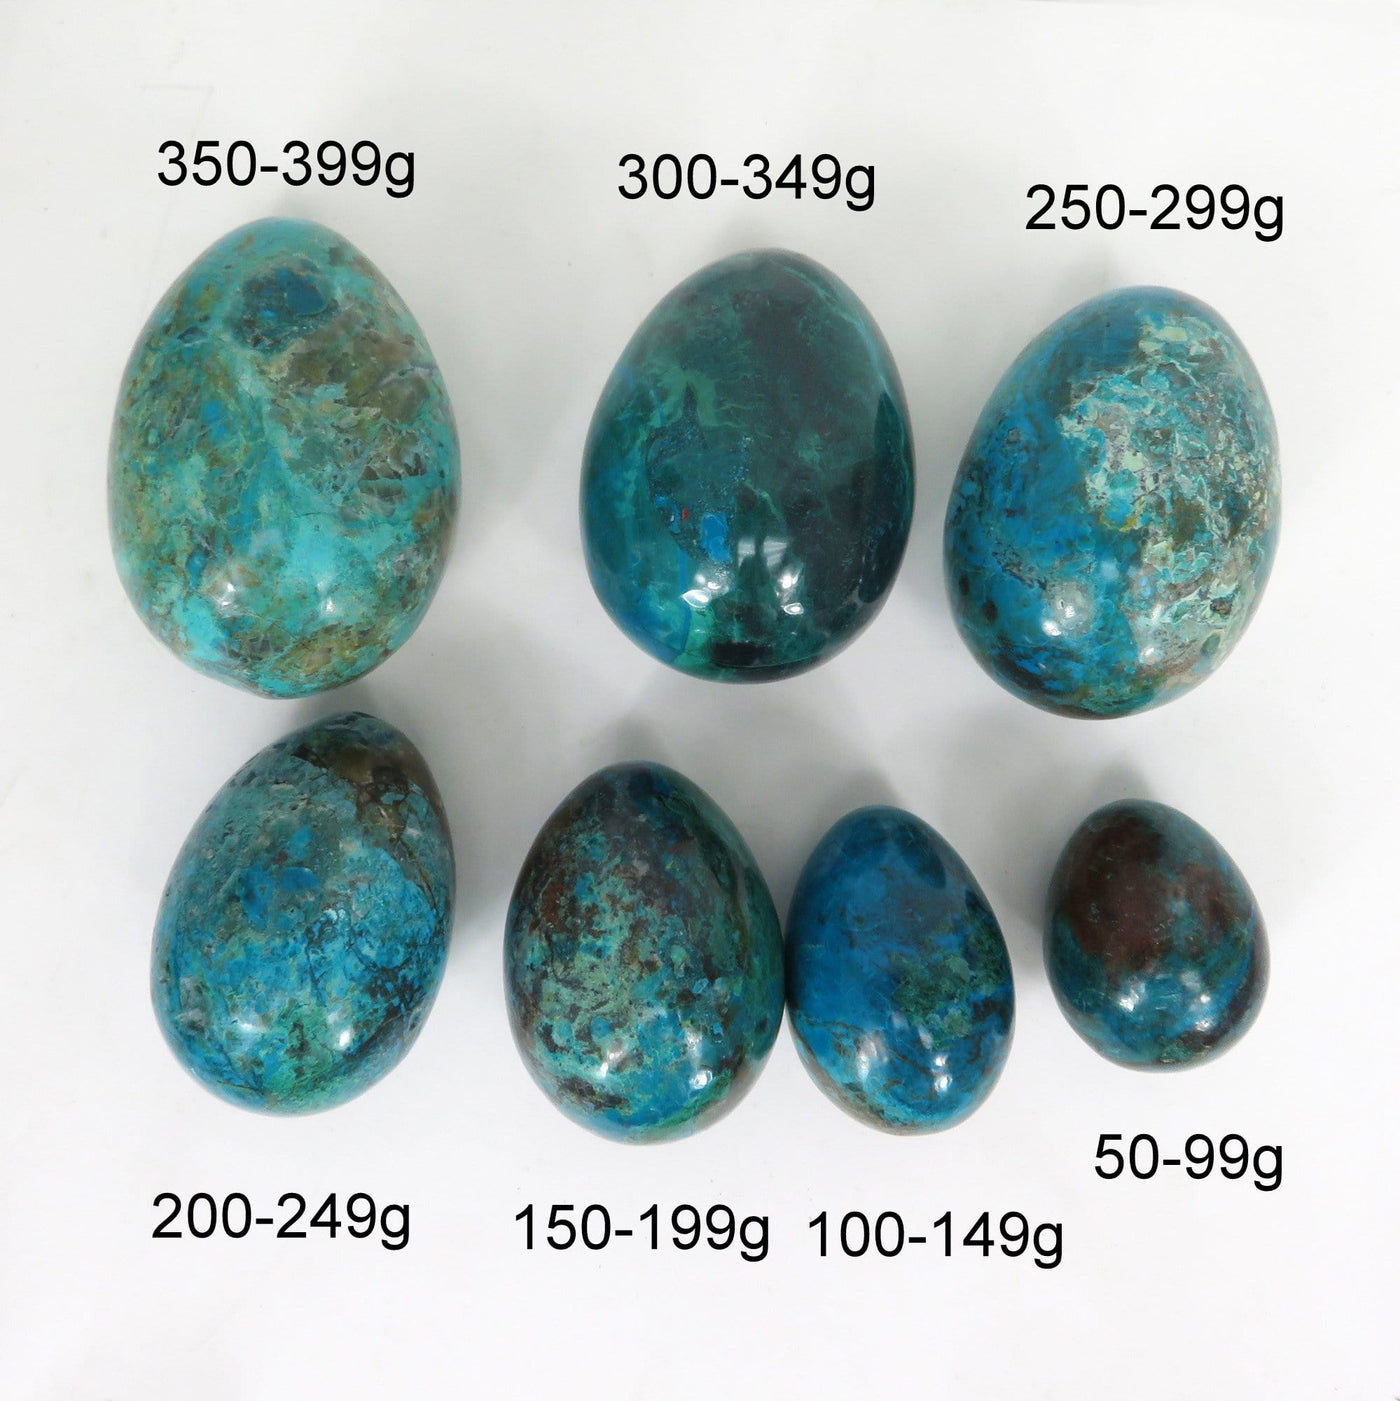 7 sizes of the Chrysocolla Polished Stone Eggs to show the differences in size. From 50g to 399g 